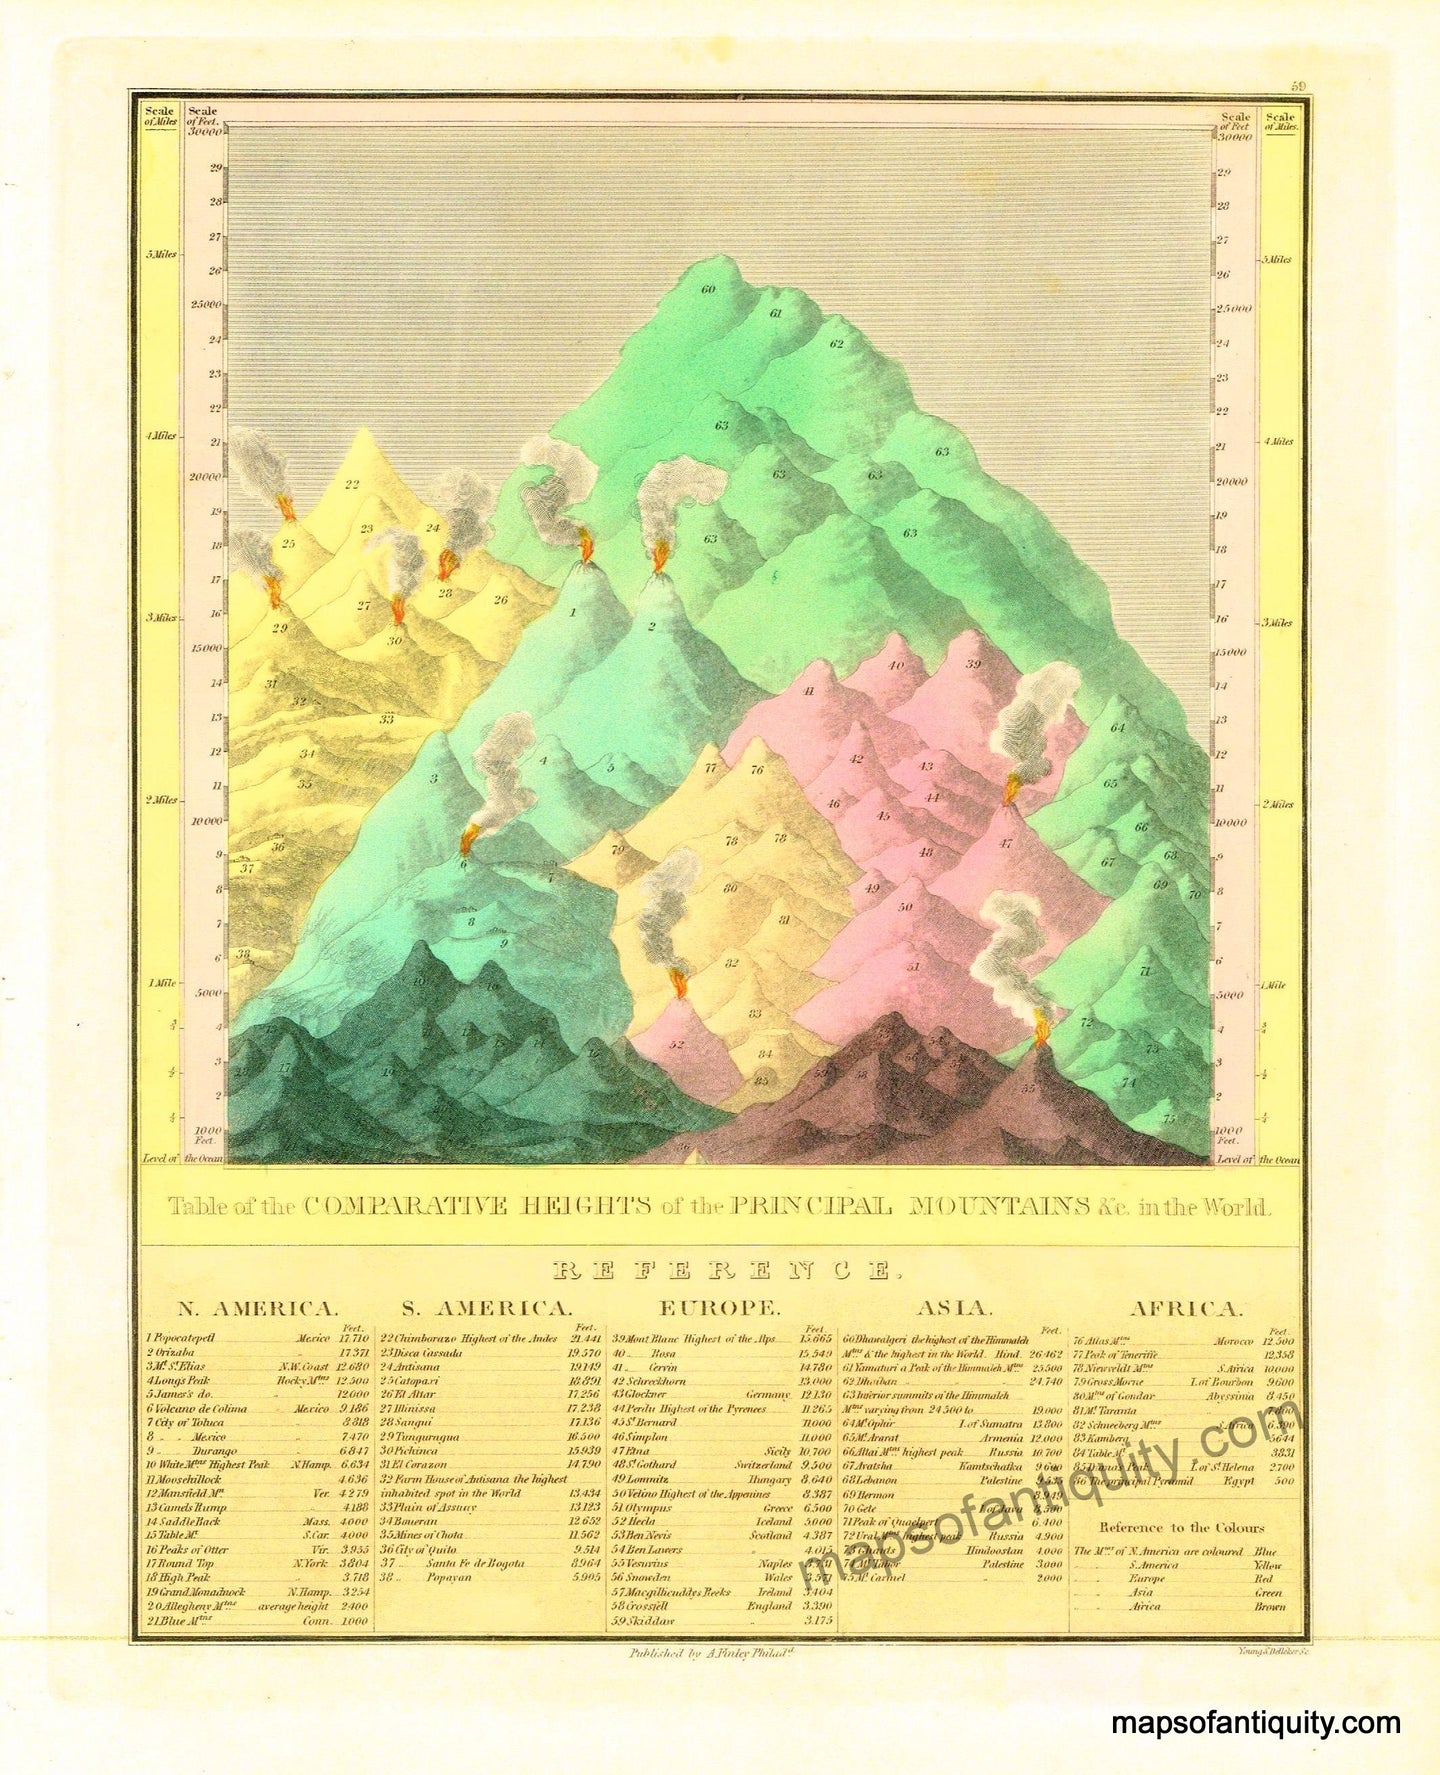 Reproduction-Map-Table-of-the-Comparative-Heights-of-the-Principal-Mountains-in-the-World-Print---Reproduction---Reproductions---Reproduction-Maps-Of-Antiquity